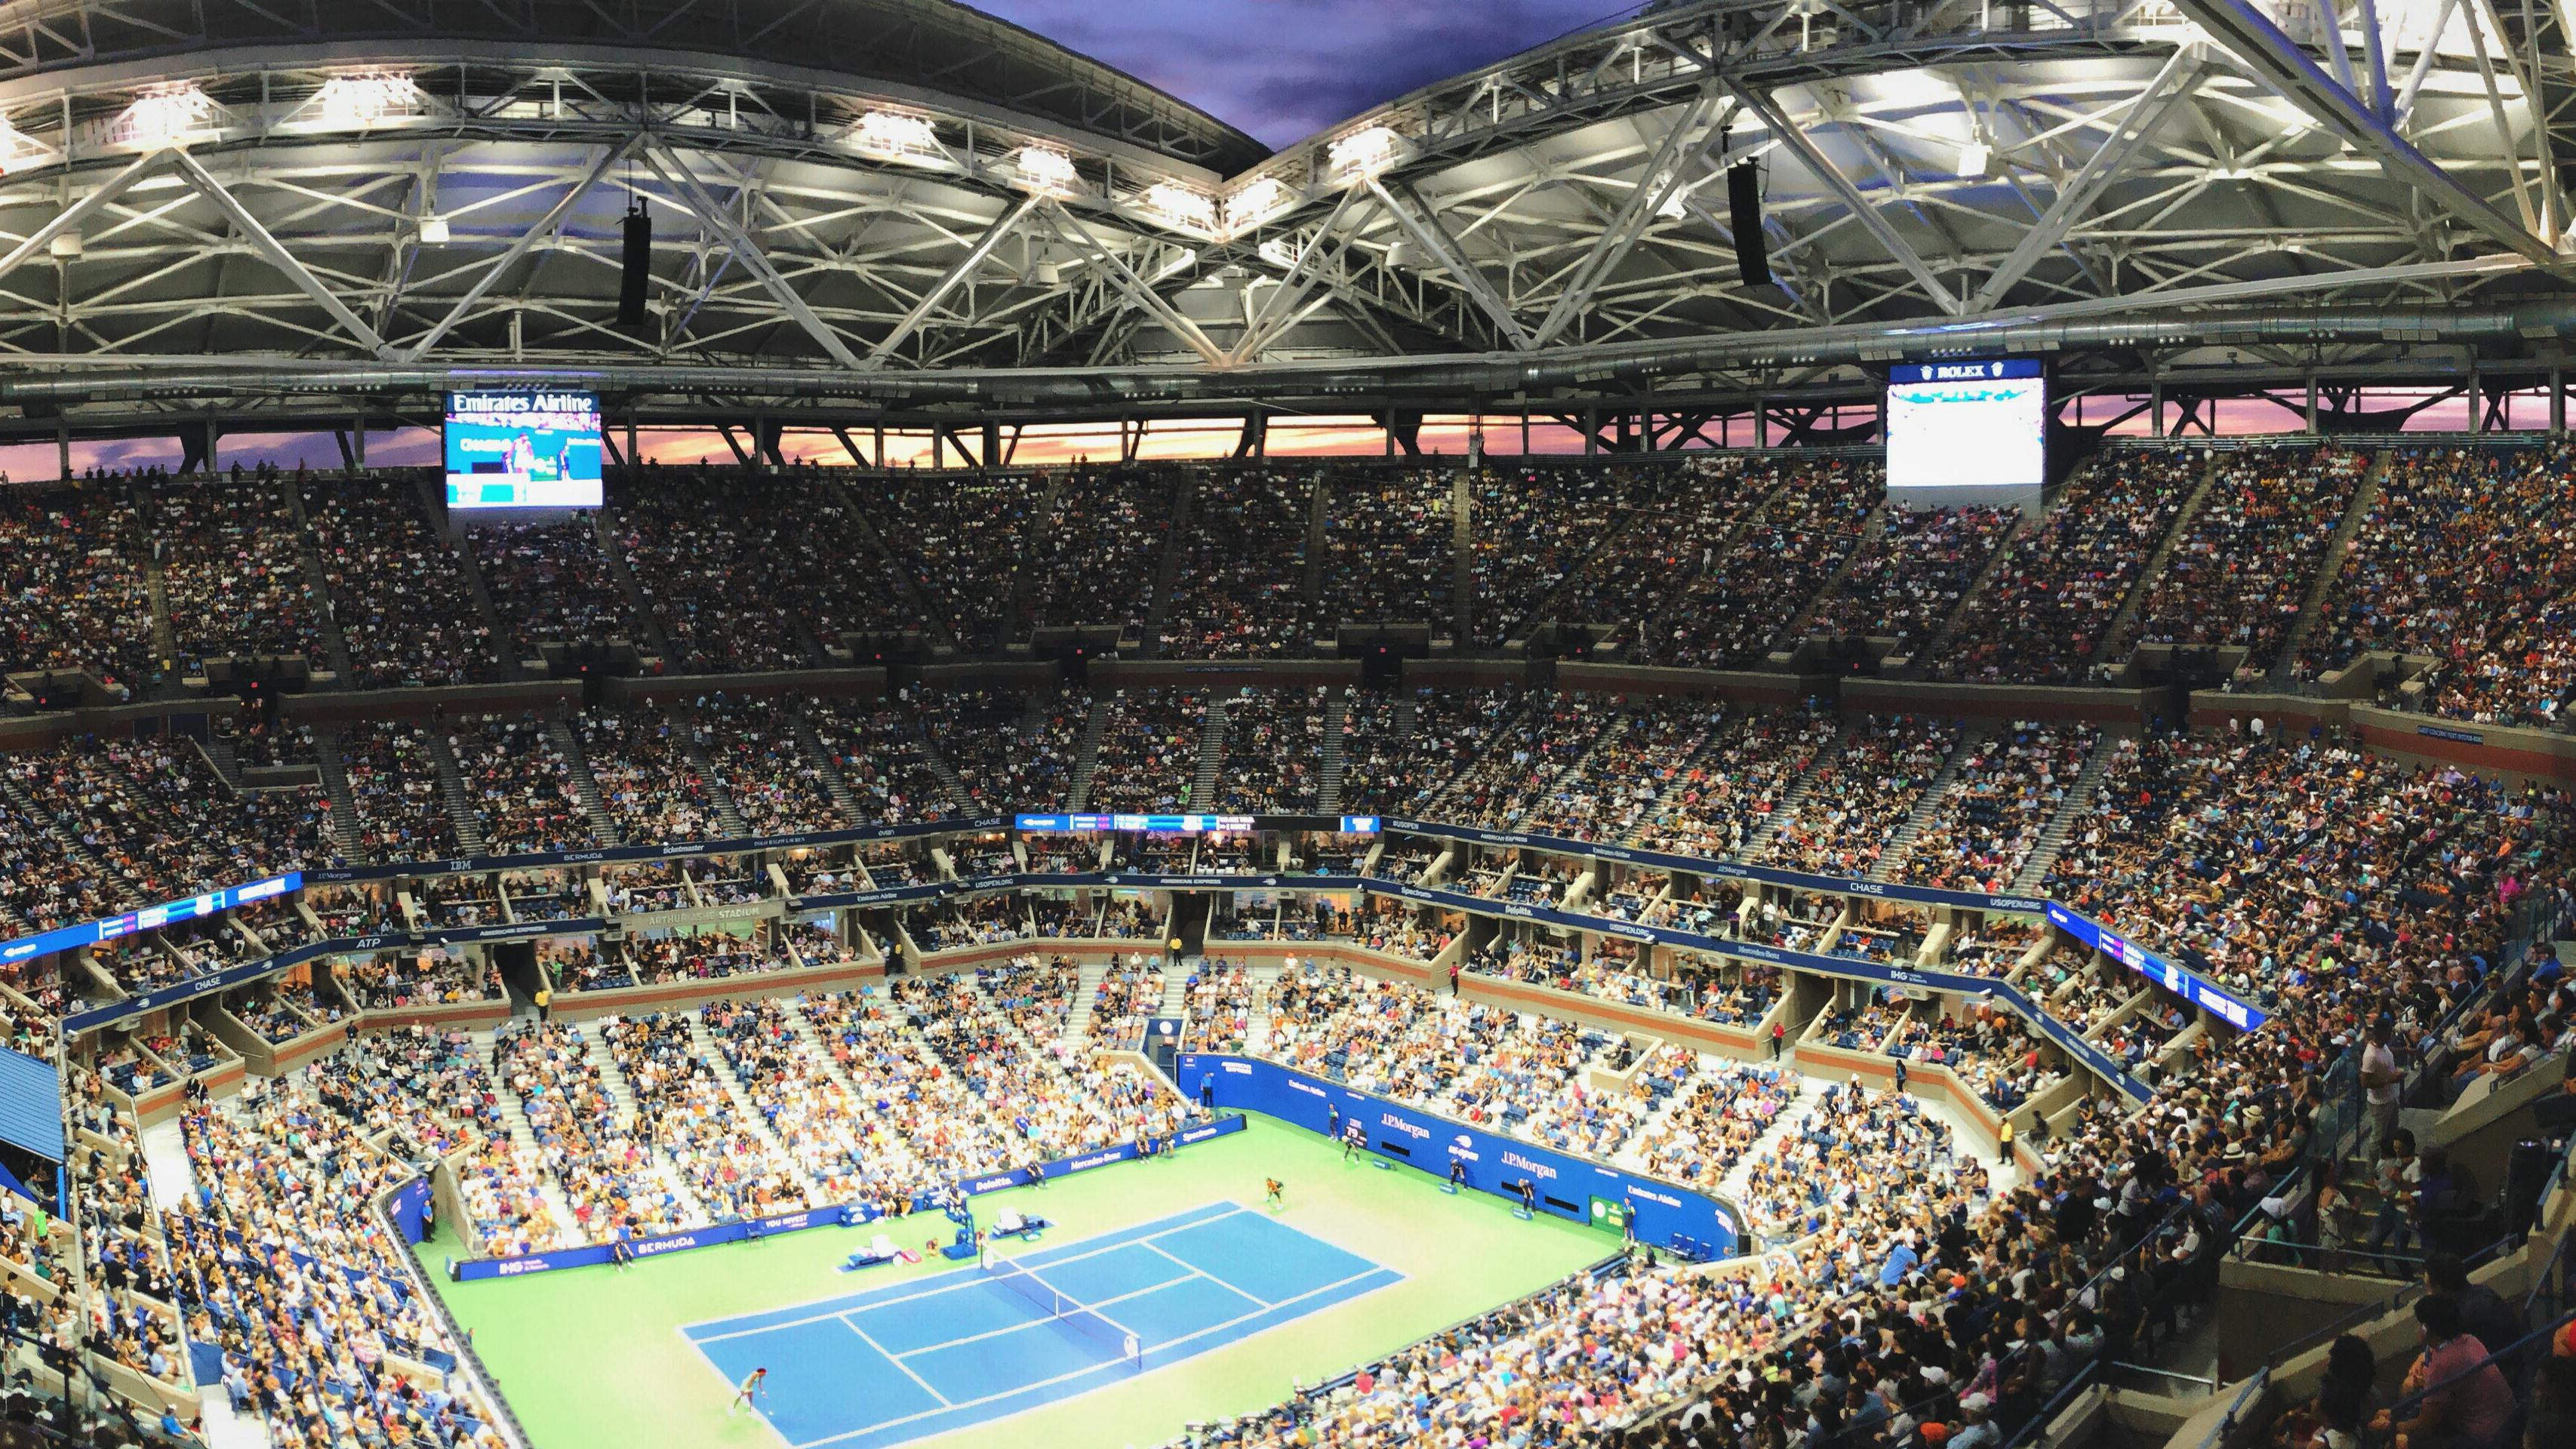 Two people playing on the Arthur Ashe stadium in the U.S. Open. The crowds are packed.